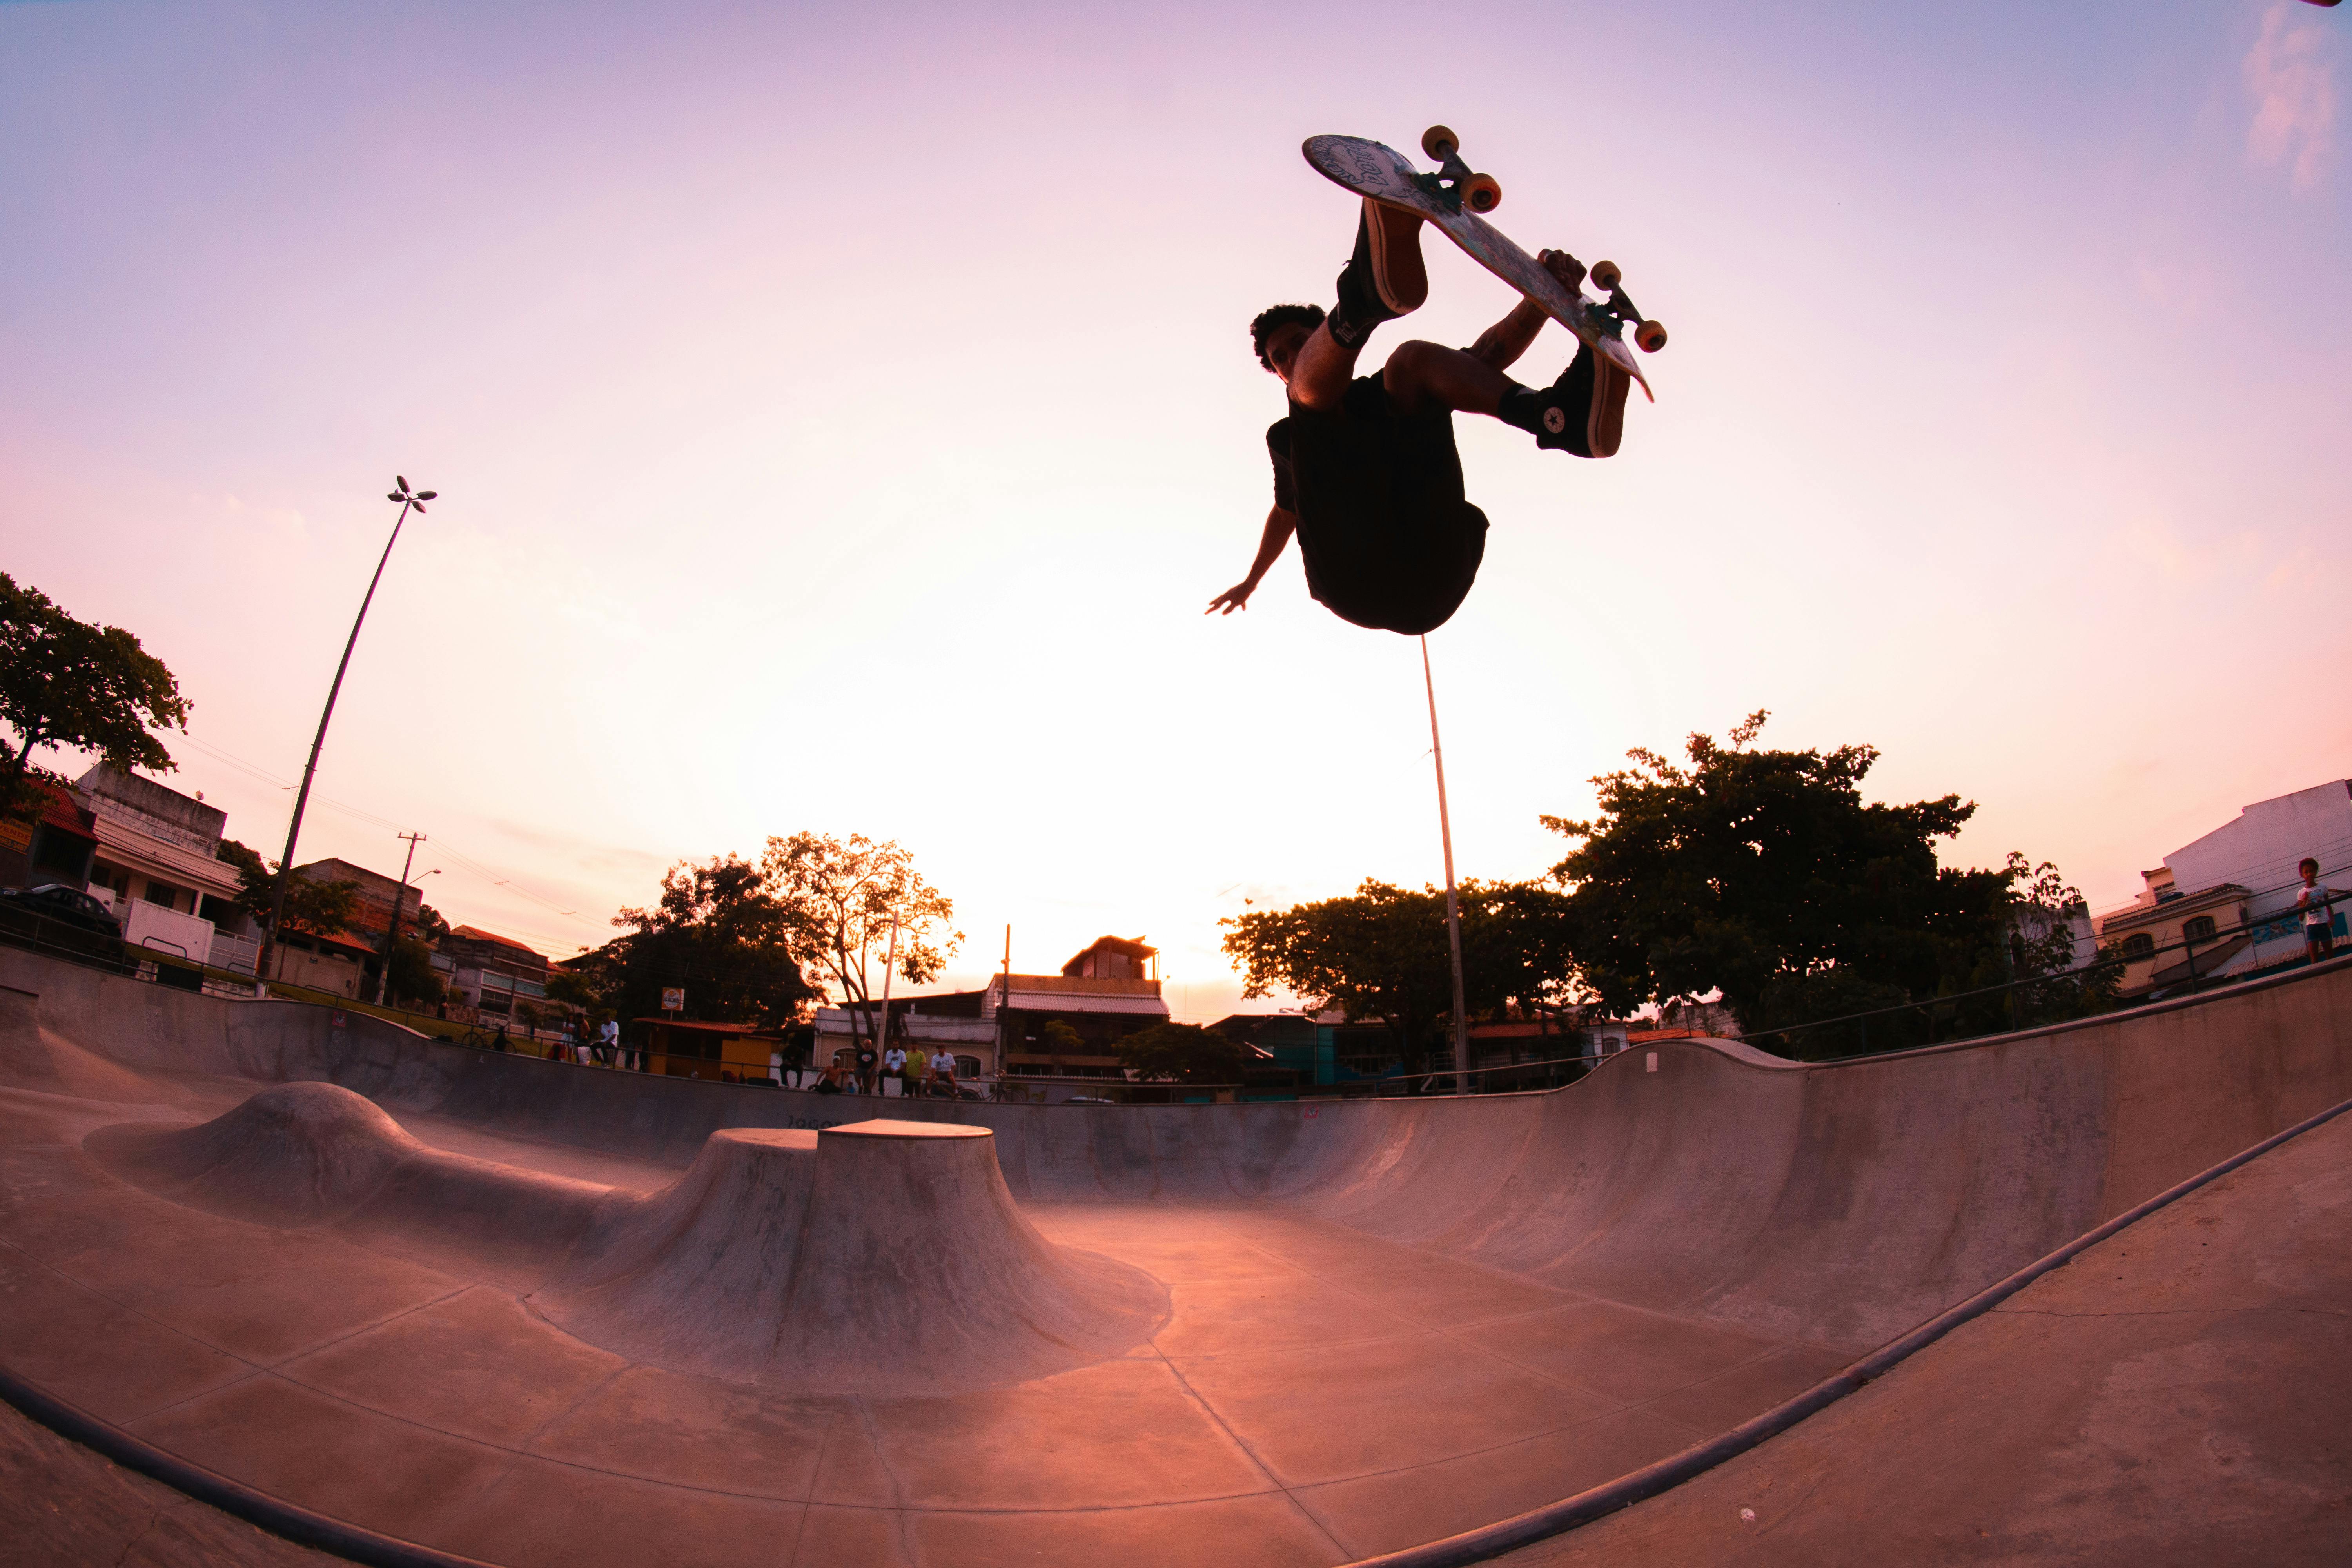 Signaal kleermaker voordat Time Lapse Photography of Man Doing Skateboard Trick · Free Stock Photo